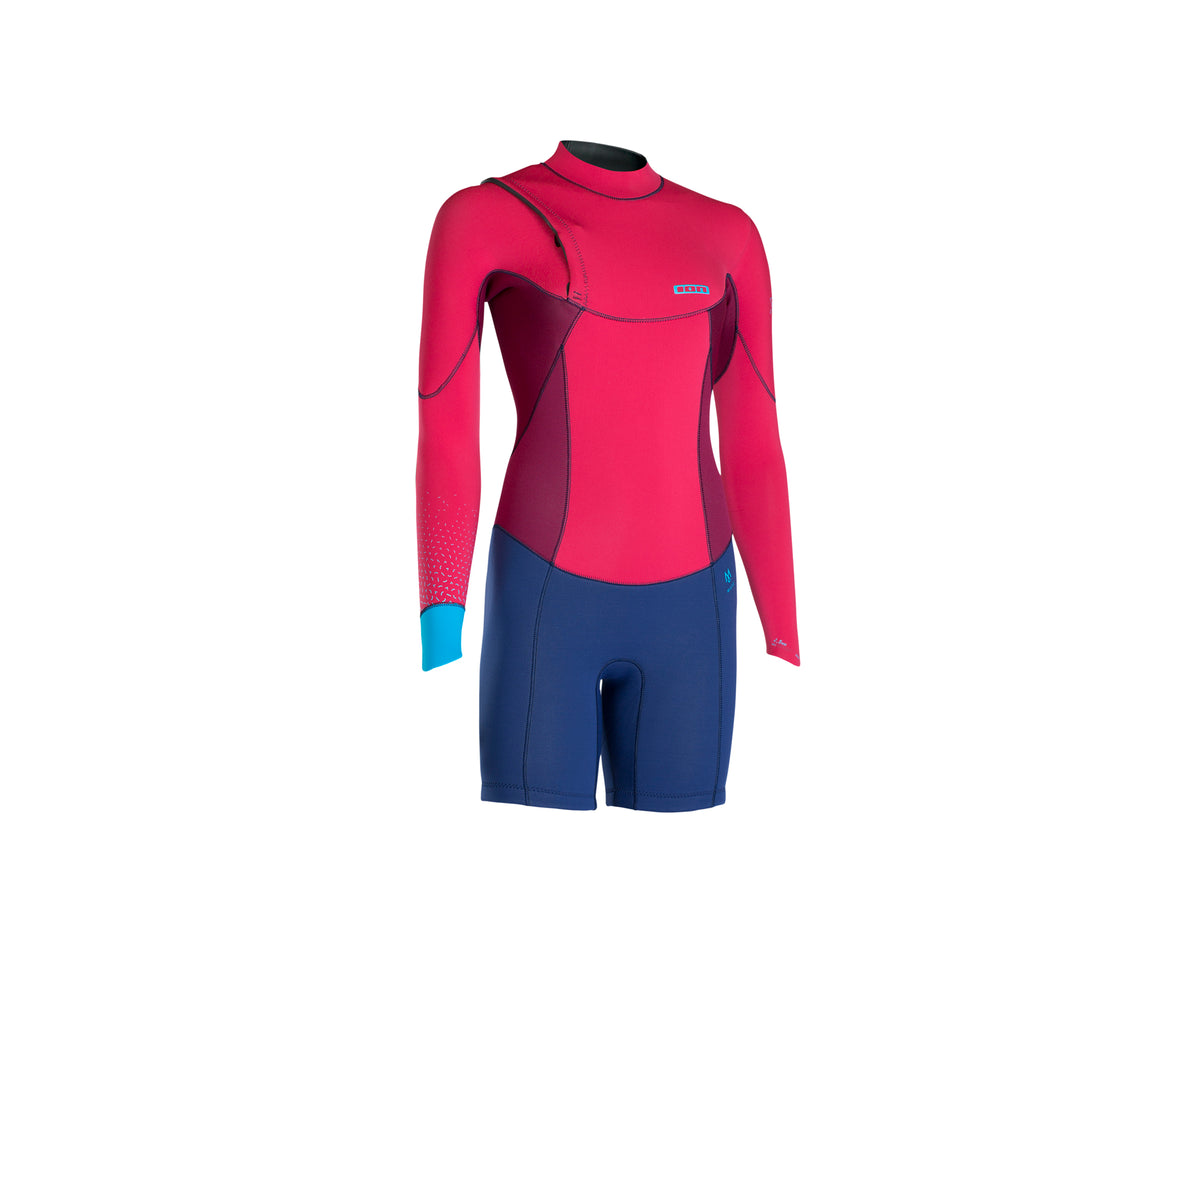 ION MUSE SHORTY ZIPLESS LS 2.5 women's summer wetsuit RASPBERRY/BLUE